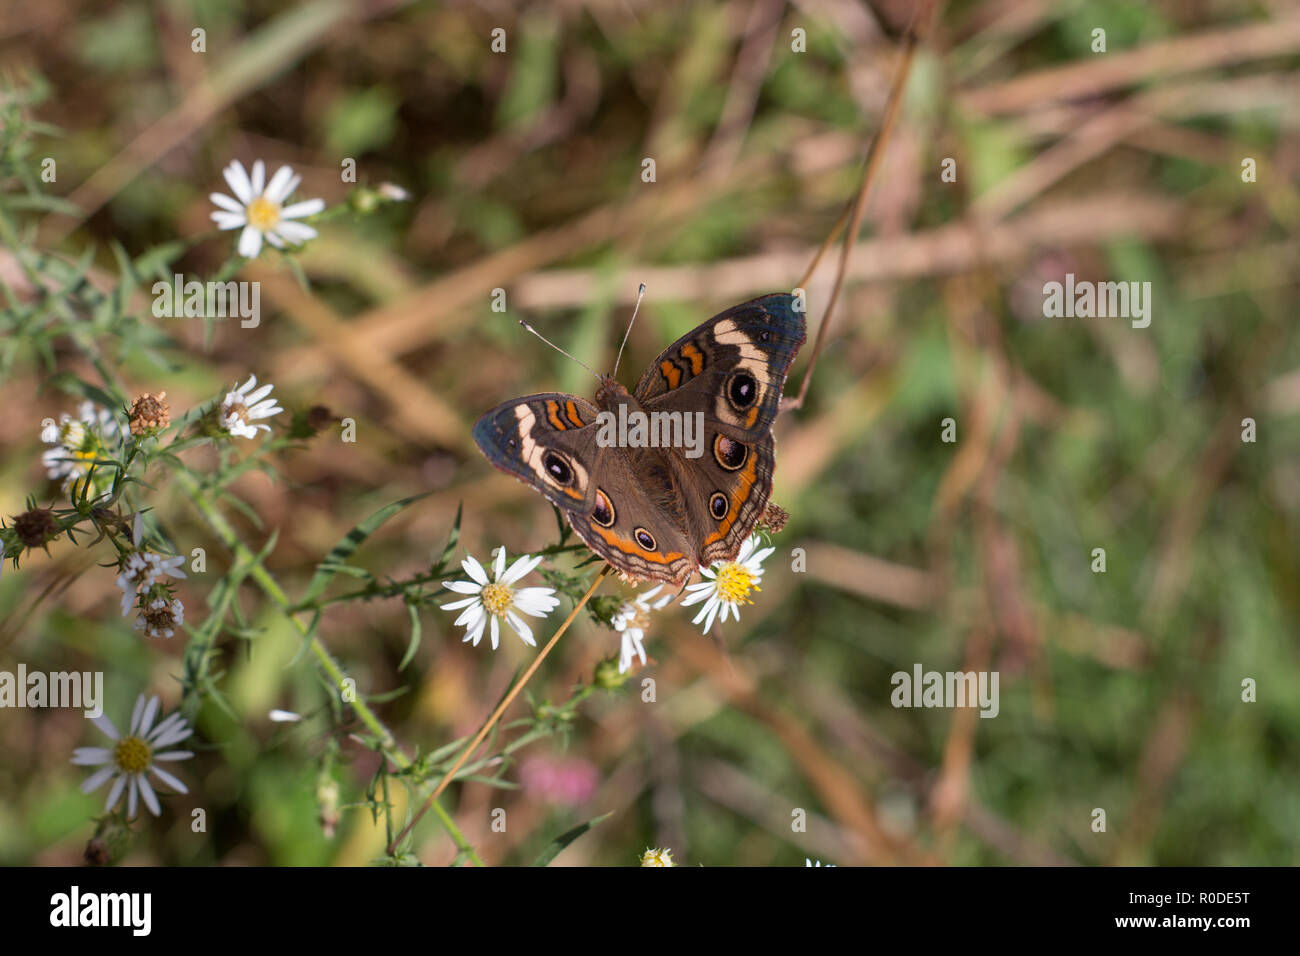 A Common Buckeye butterfly (Junonia coenia) nectaring on white heath aster (Symphyotrichum ericoides), Maryland, United States Stock Photo